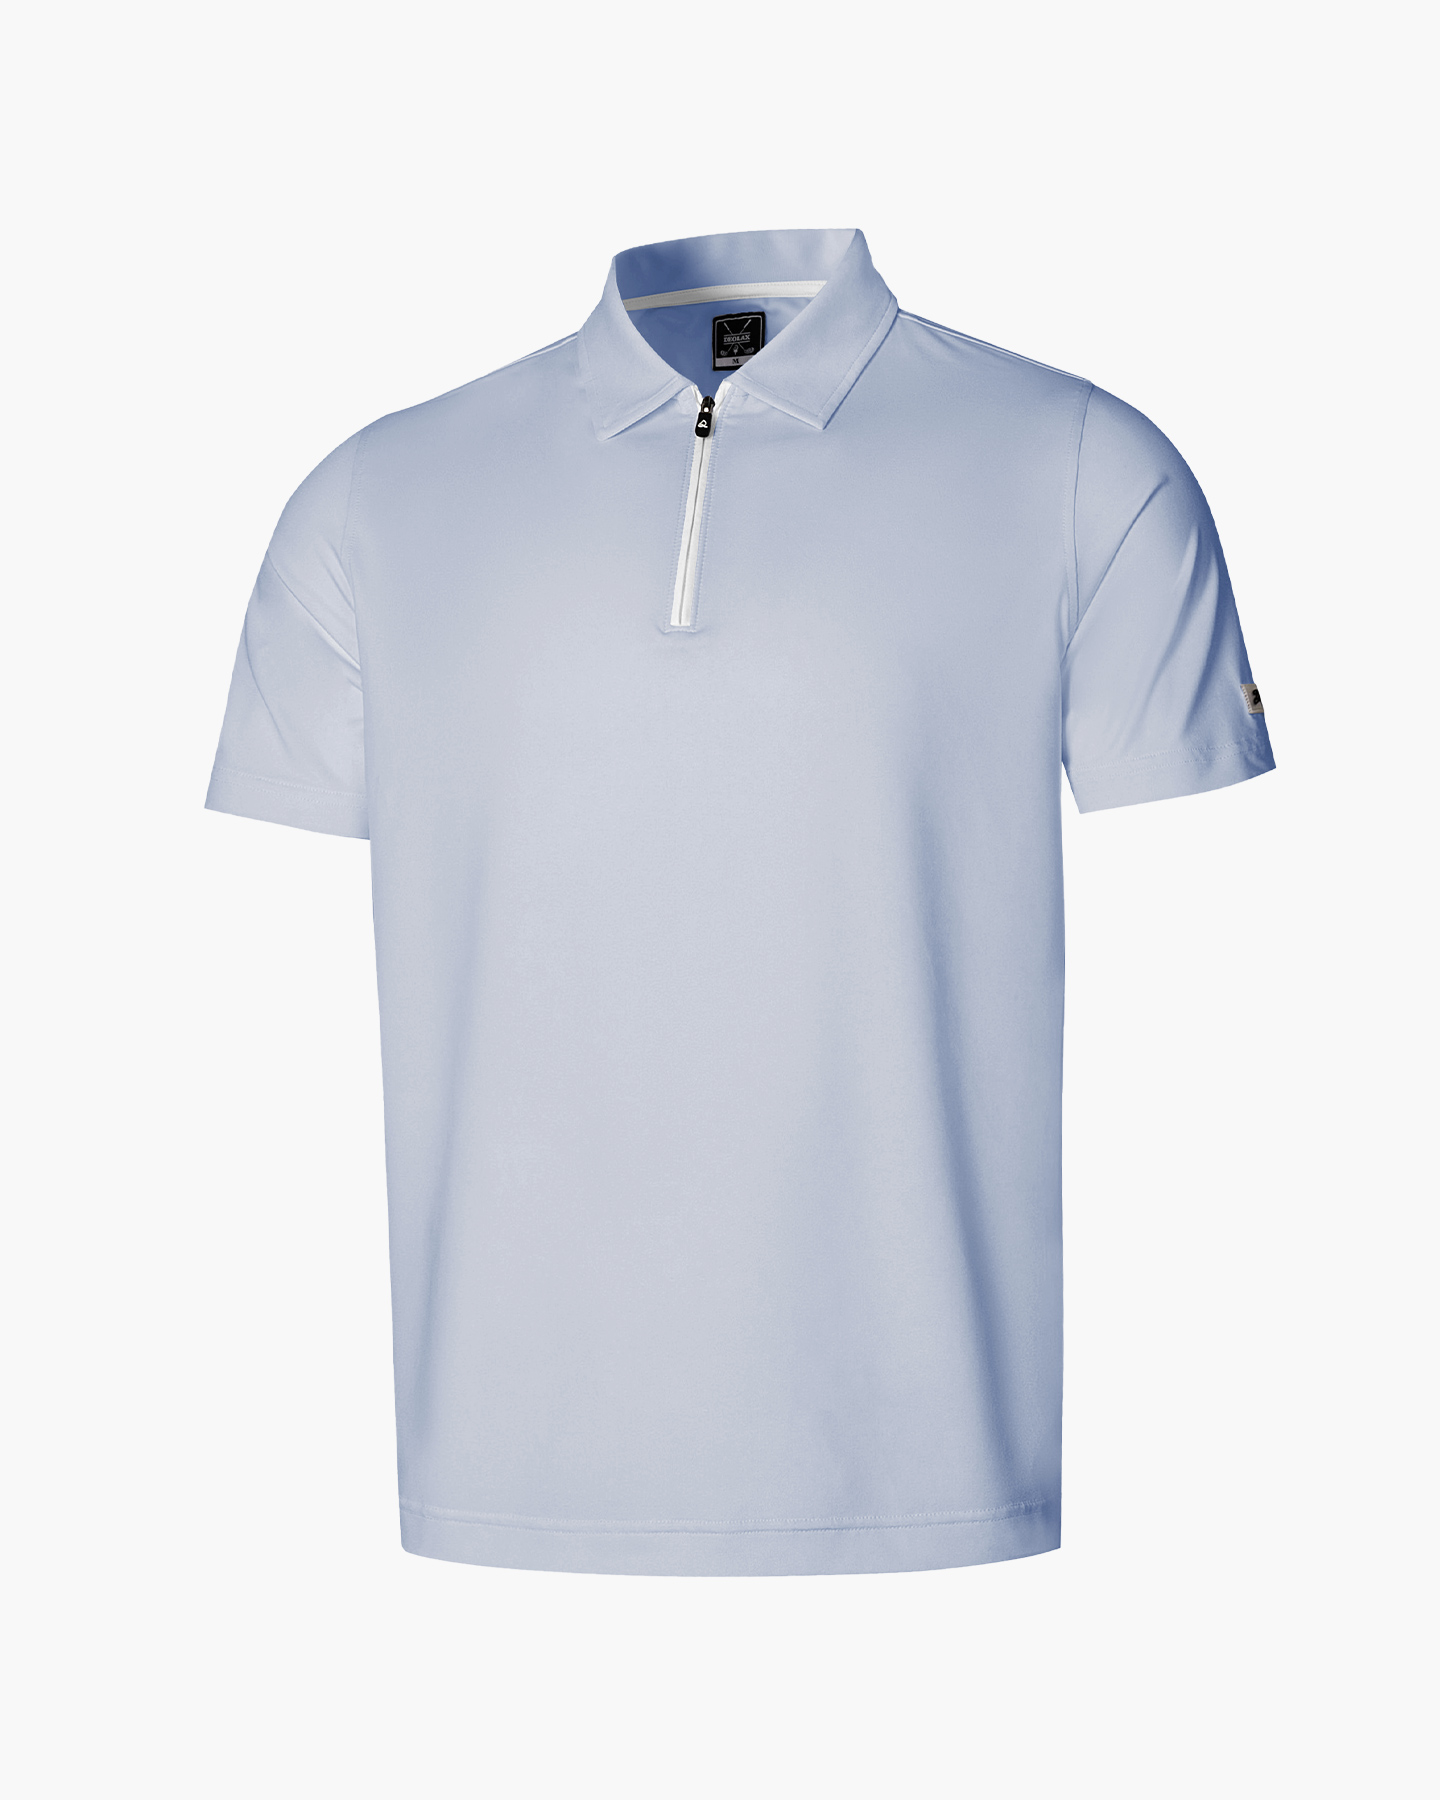 Slim Fit half zip blue polo shirt from Deolax-Golf Polo